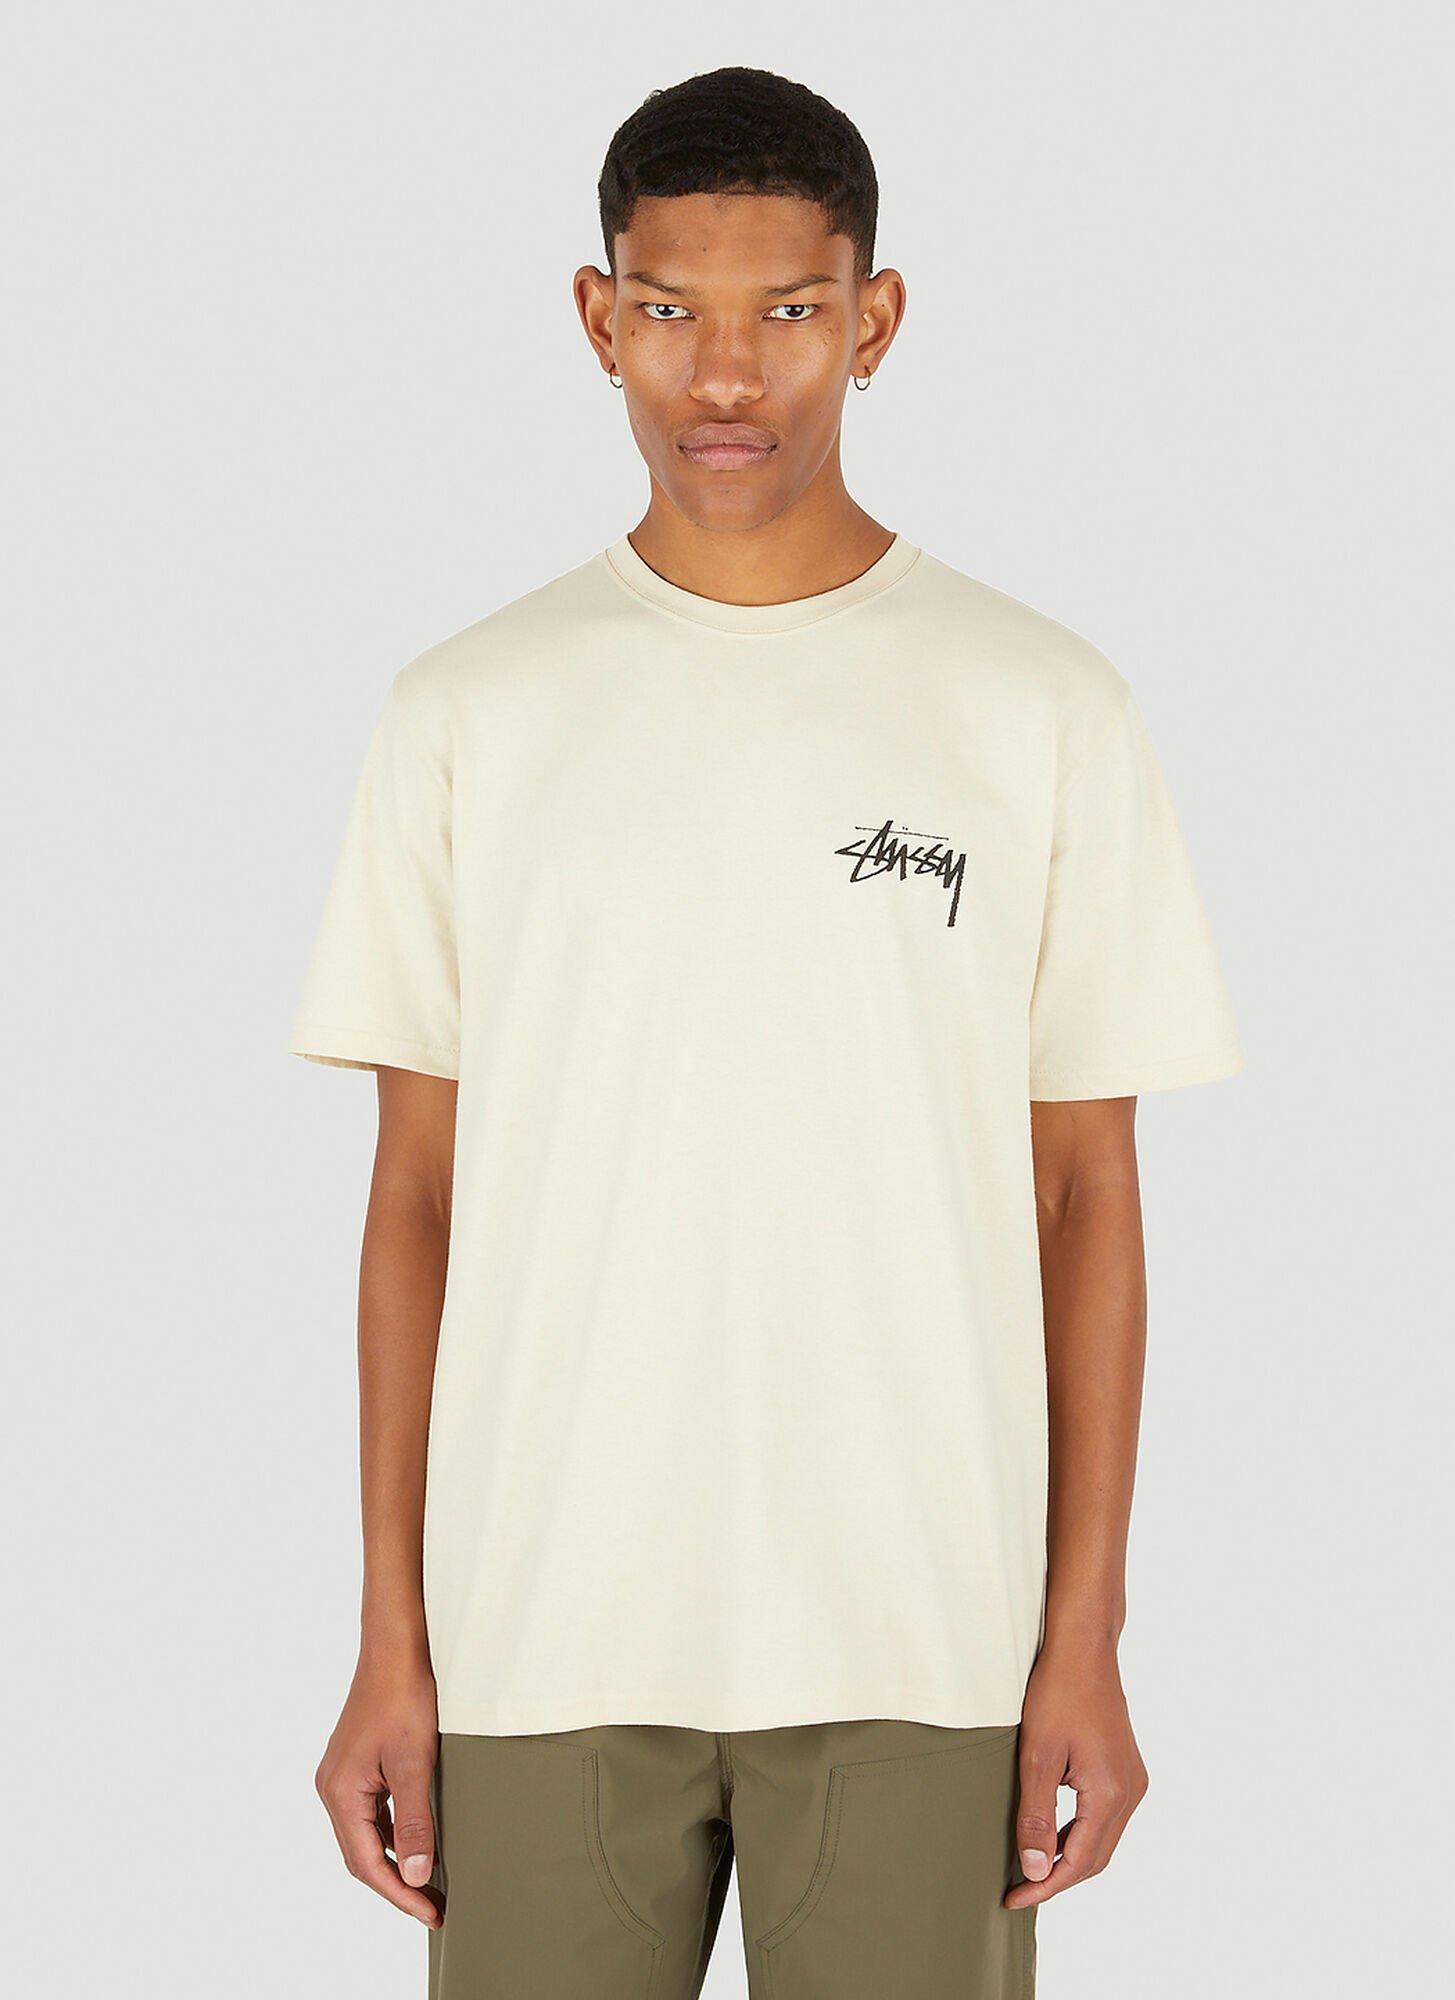 Stussy Ball Fade T-shirt in Natural for Men Lyst